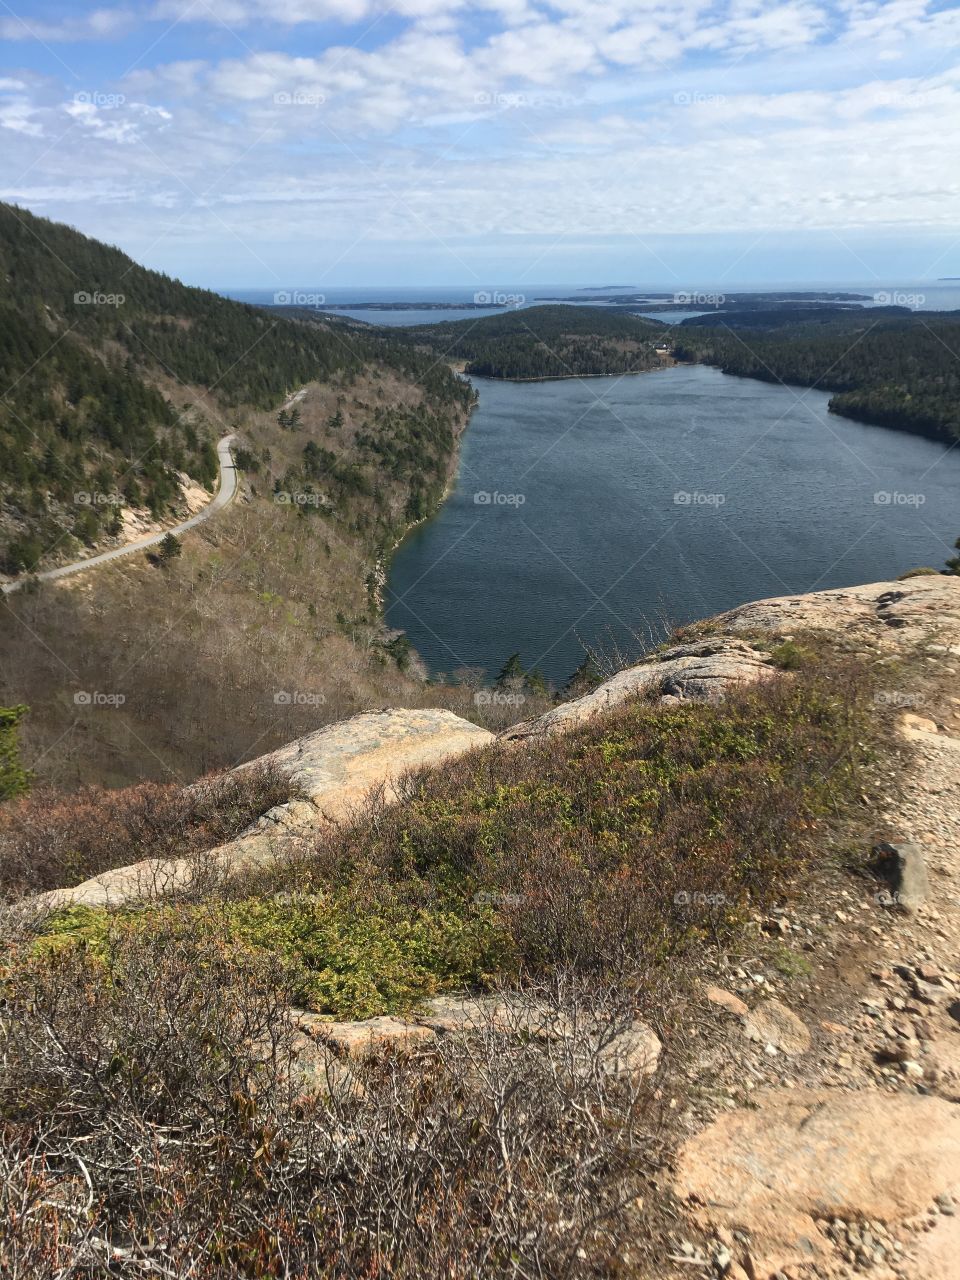 Overlooking the Acadian trails and Eagle lake. Bits of islands and the sea are visible by the looming side of the mountain.